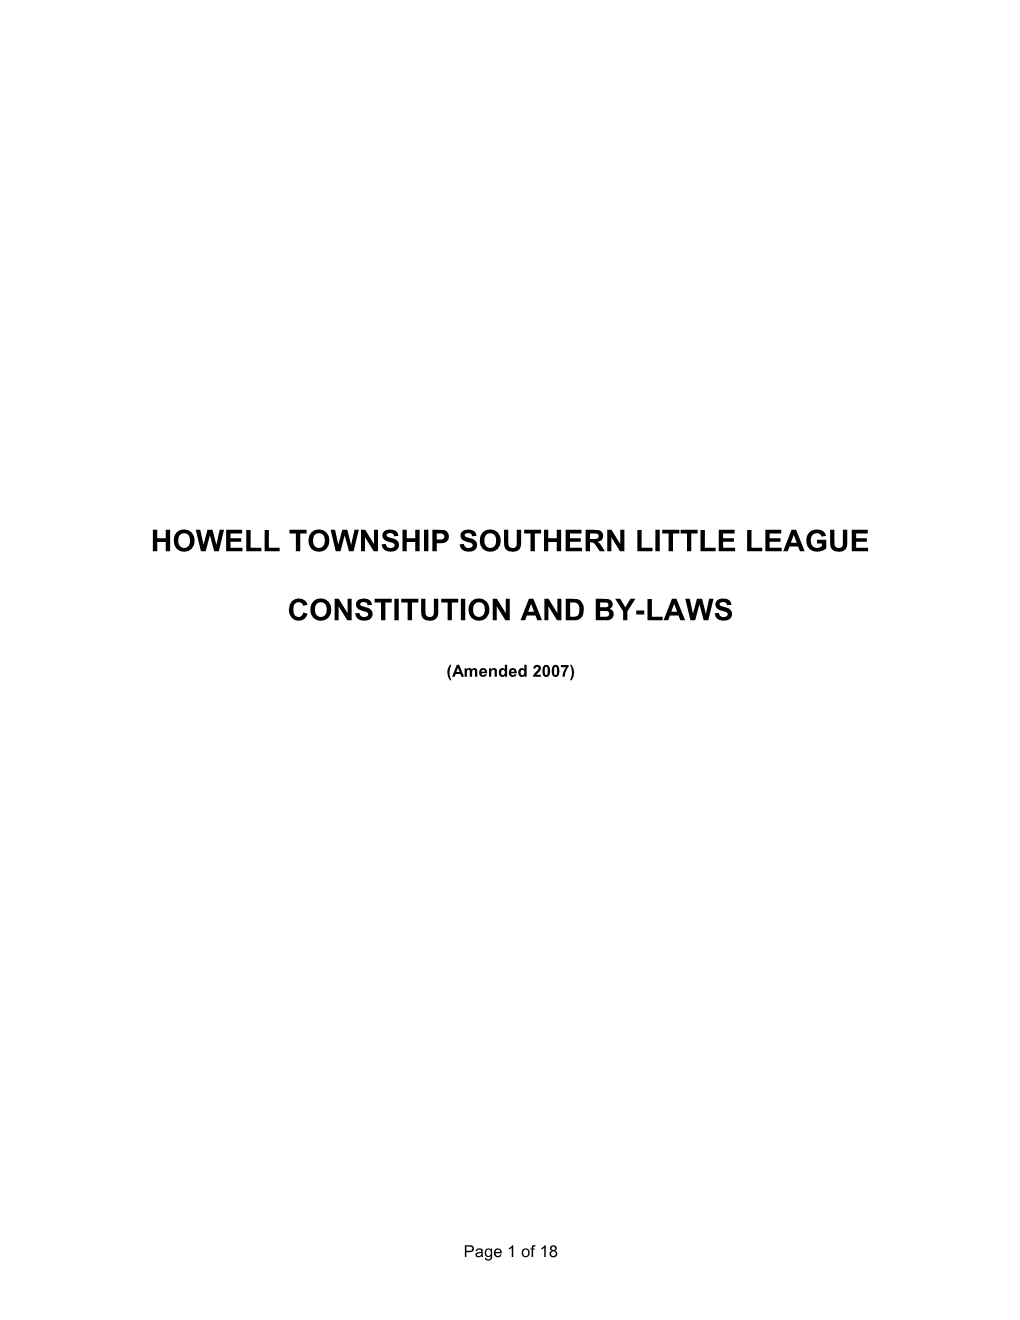 Howell Township Southern Little League